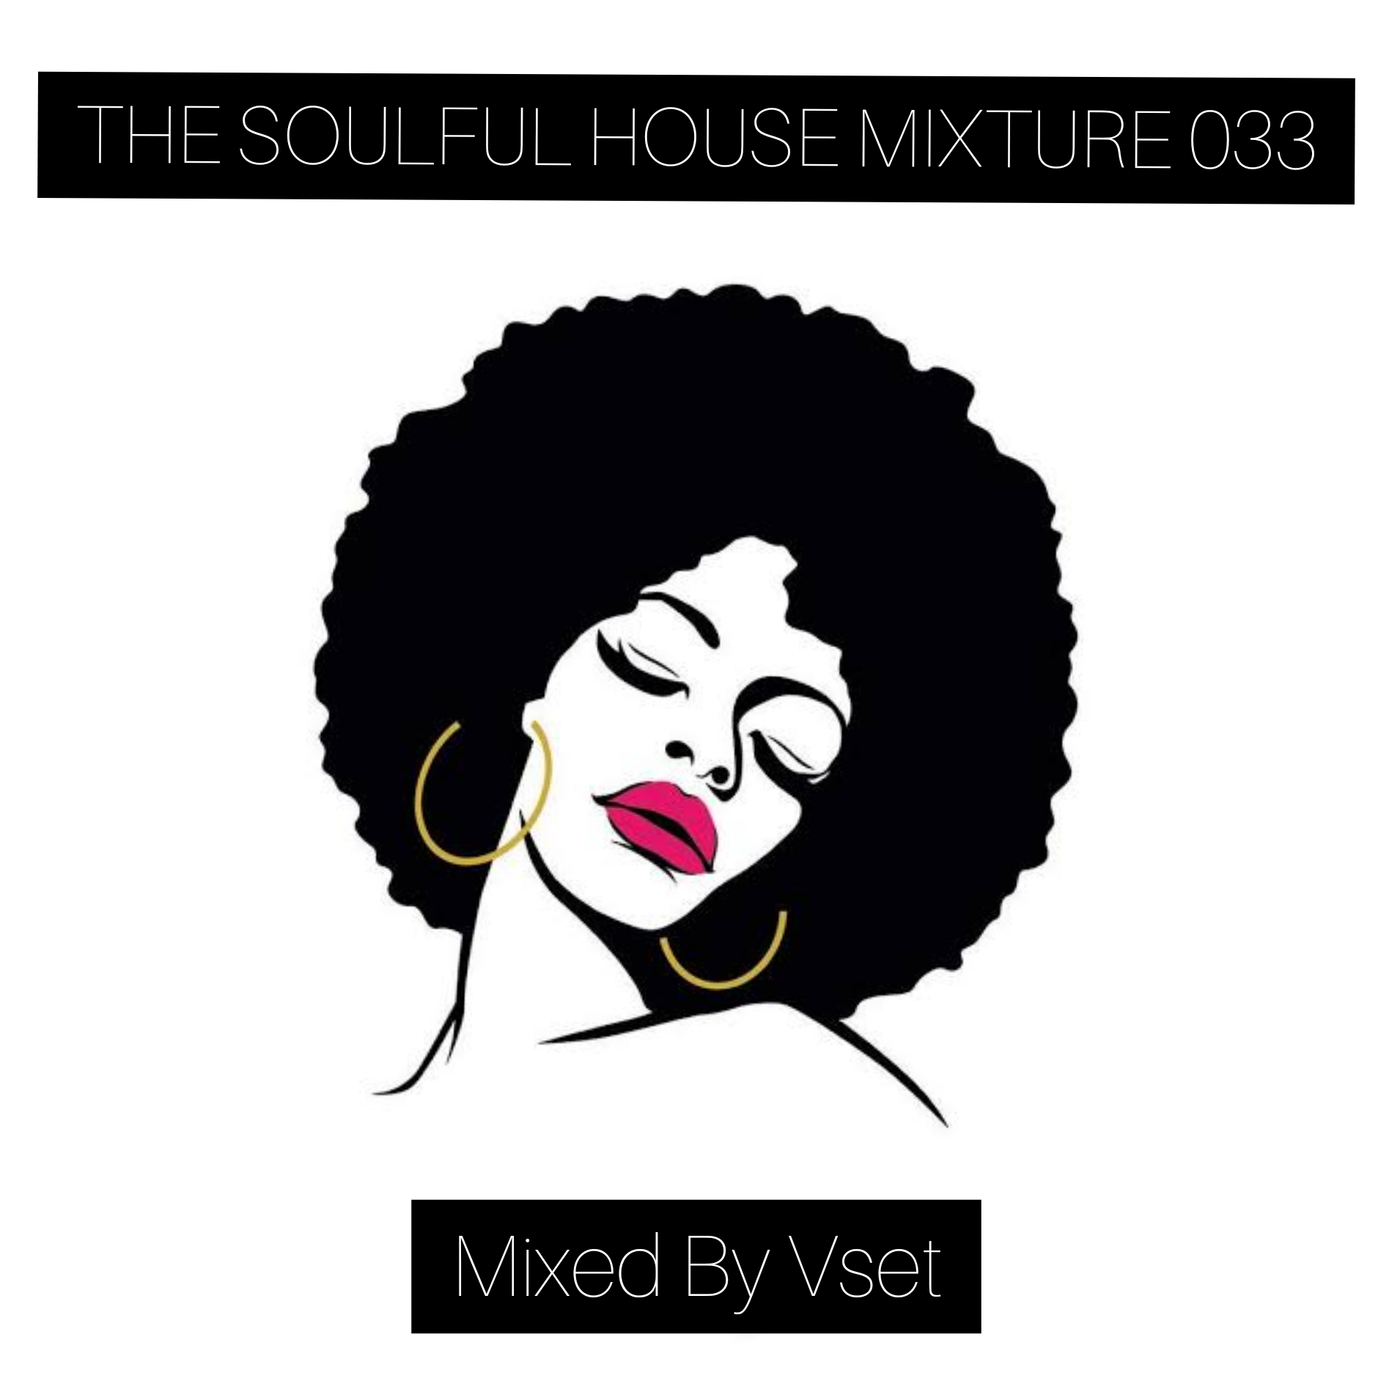 The Soulful House Mixture 033 Mixed By Vset